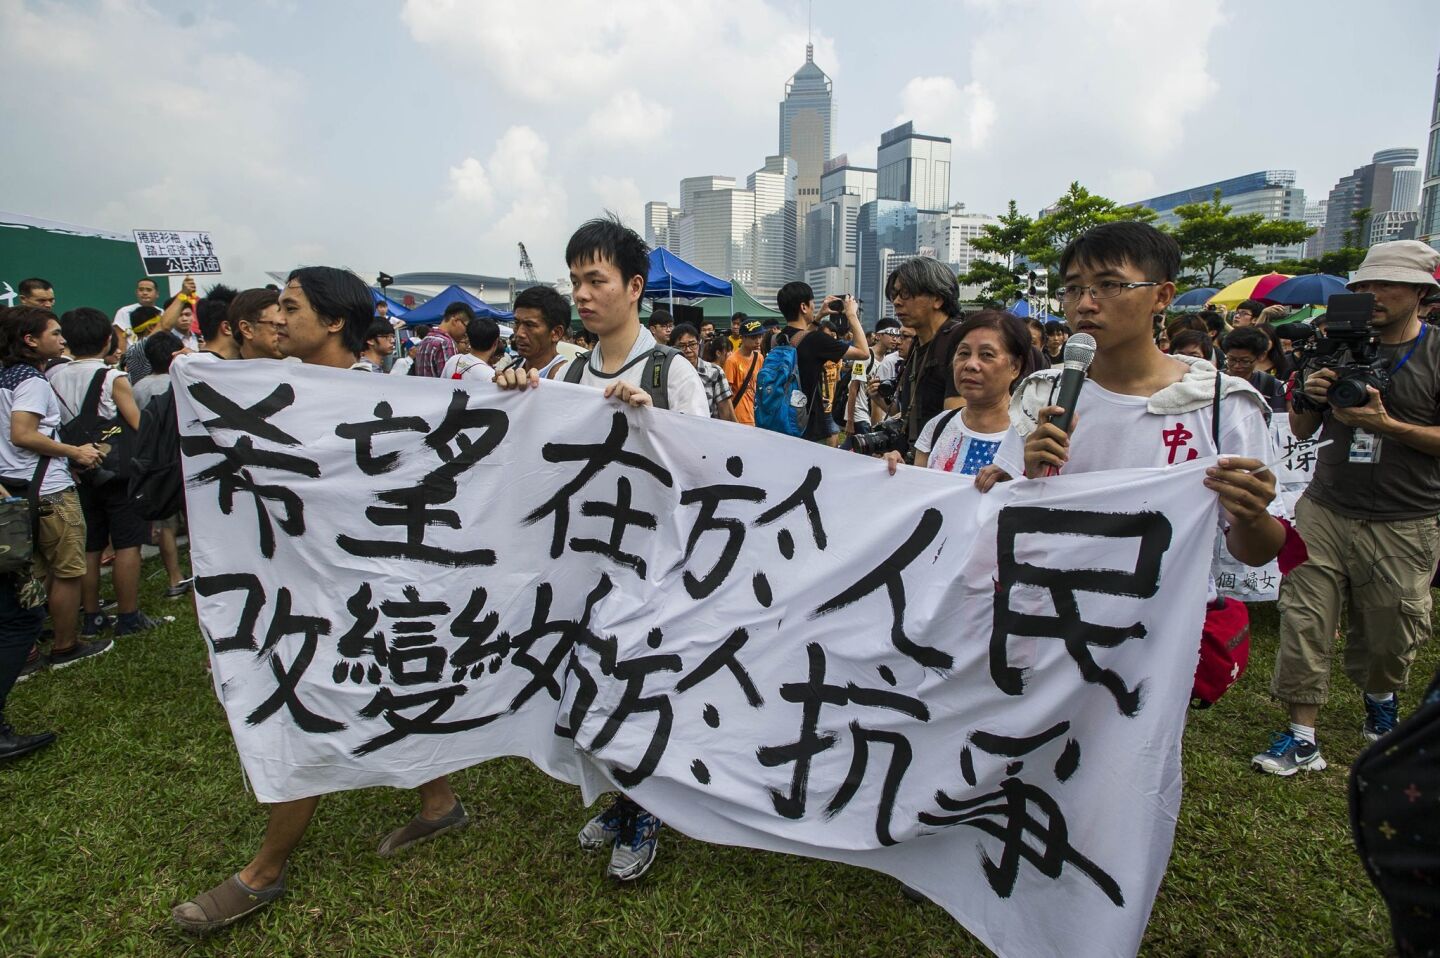 Students protesting for greater democratic rights march in Hong Kong on Sept. 24.